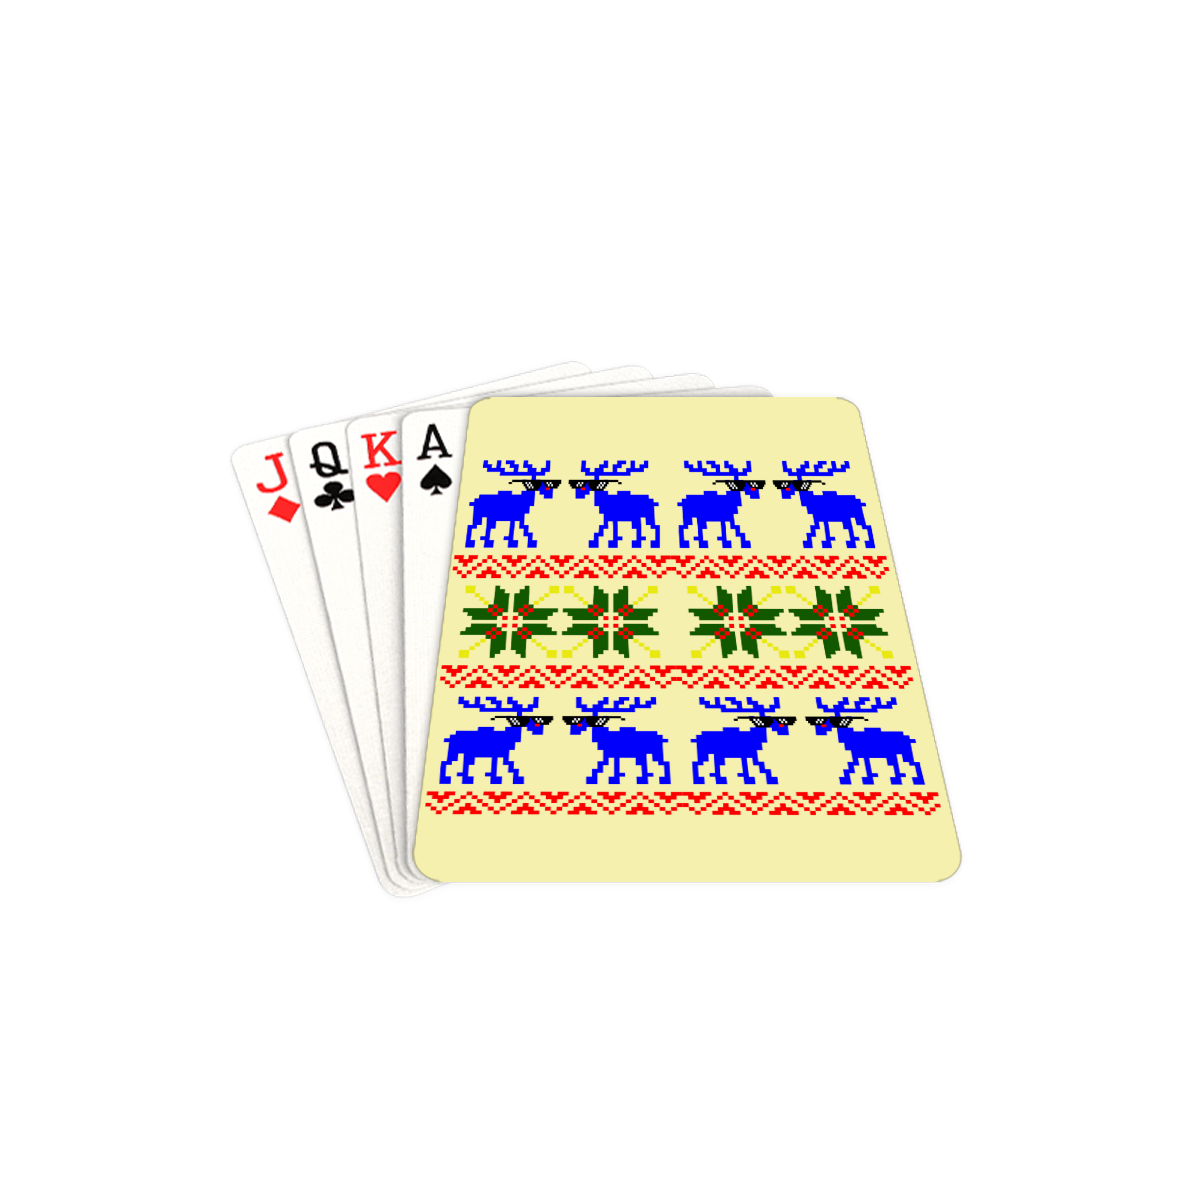 Christmas Ugly Sweater Deal With It on Yellow Playing Cards 2.5"x3.5"